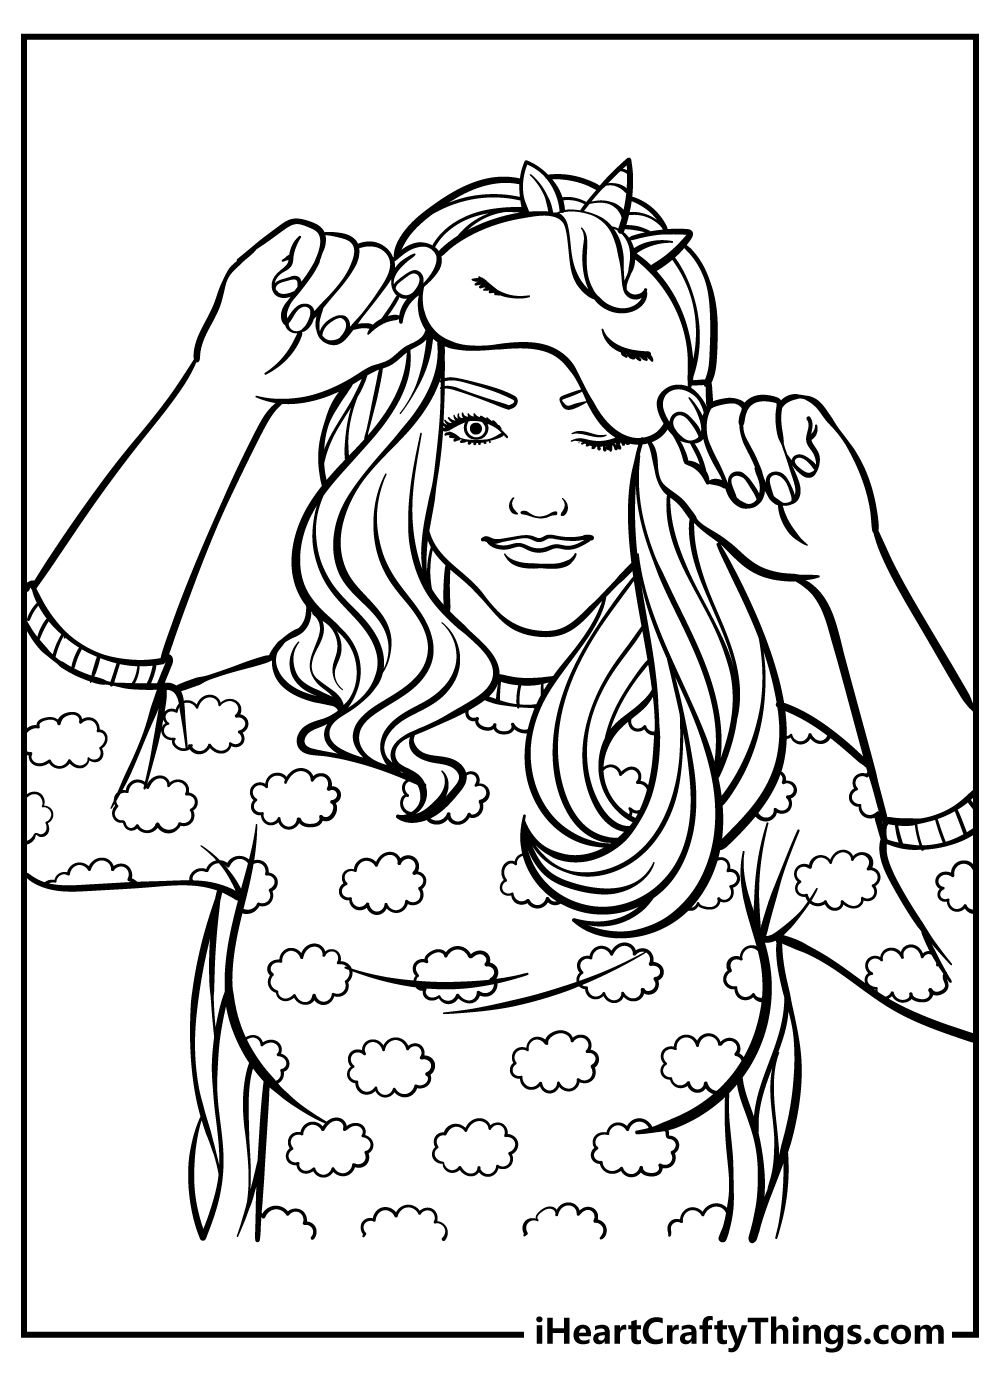 Coloring pages for teens free printables